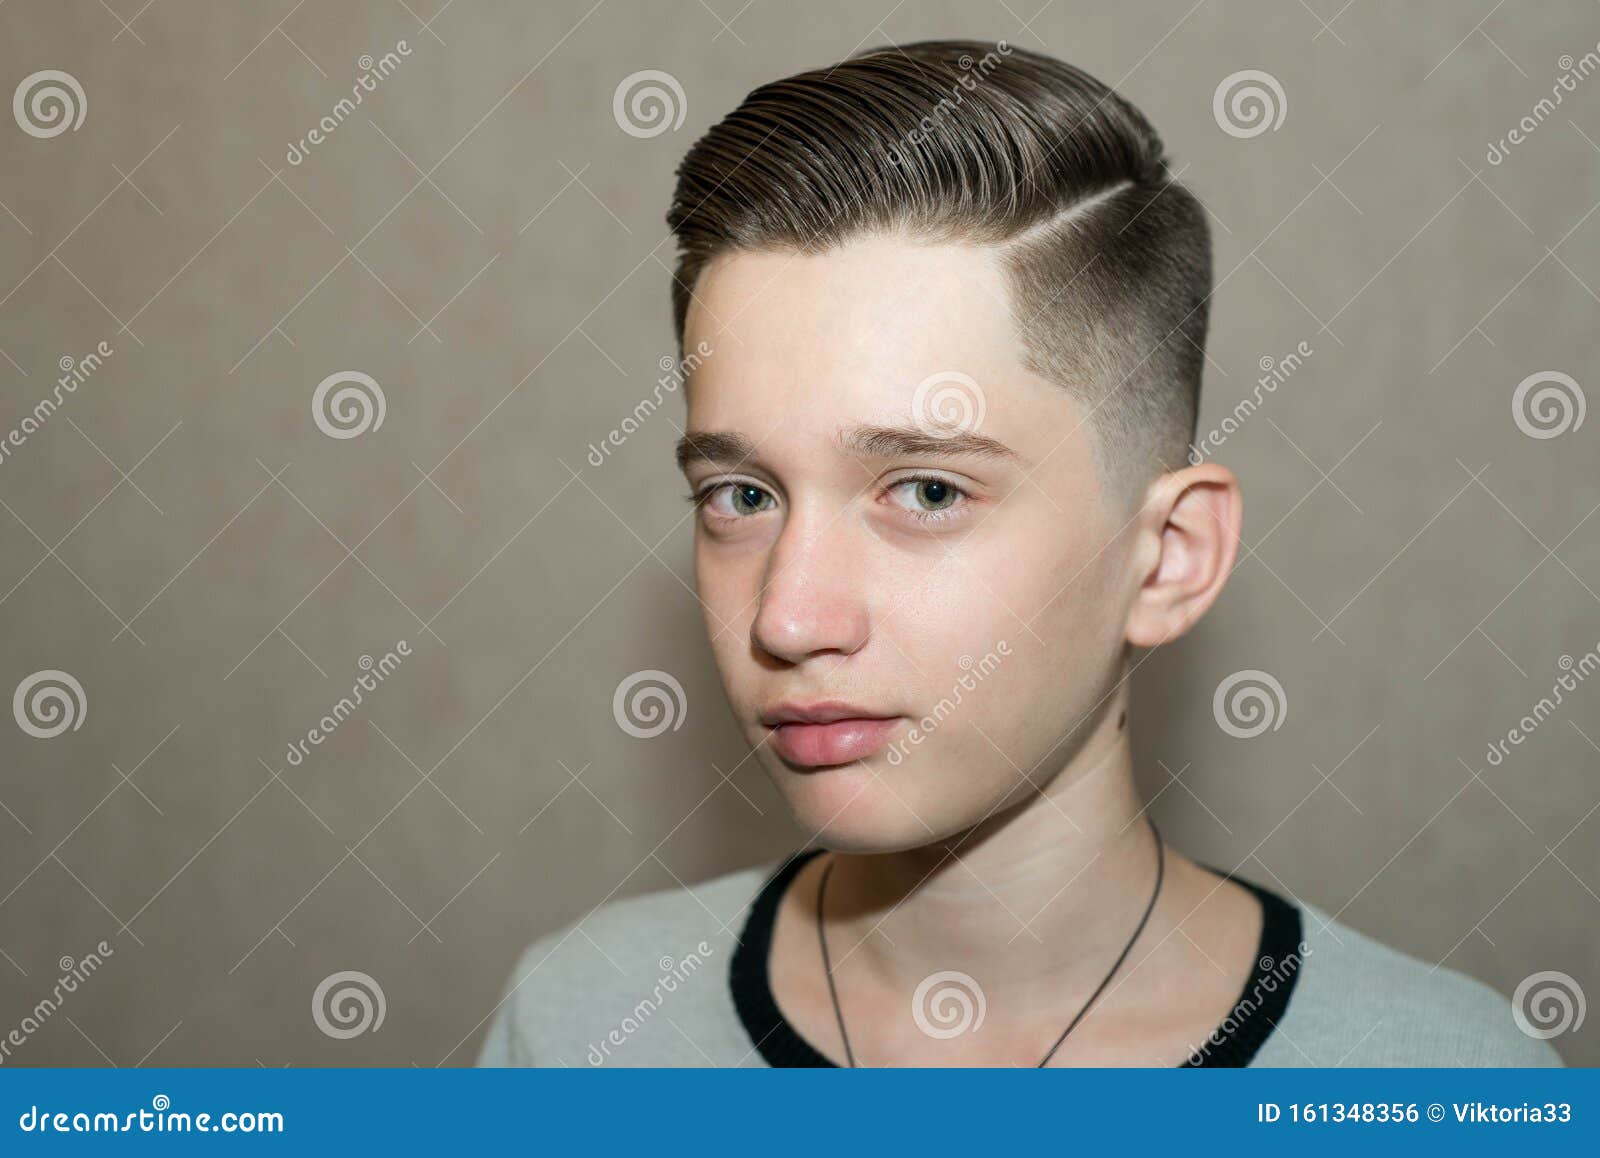 21 Popular Mid Fade Haircuts For Men in 2024 | Mid fade haircut, Short  haircut styles, High fade haircut